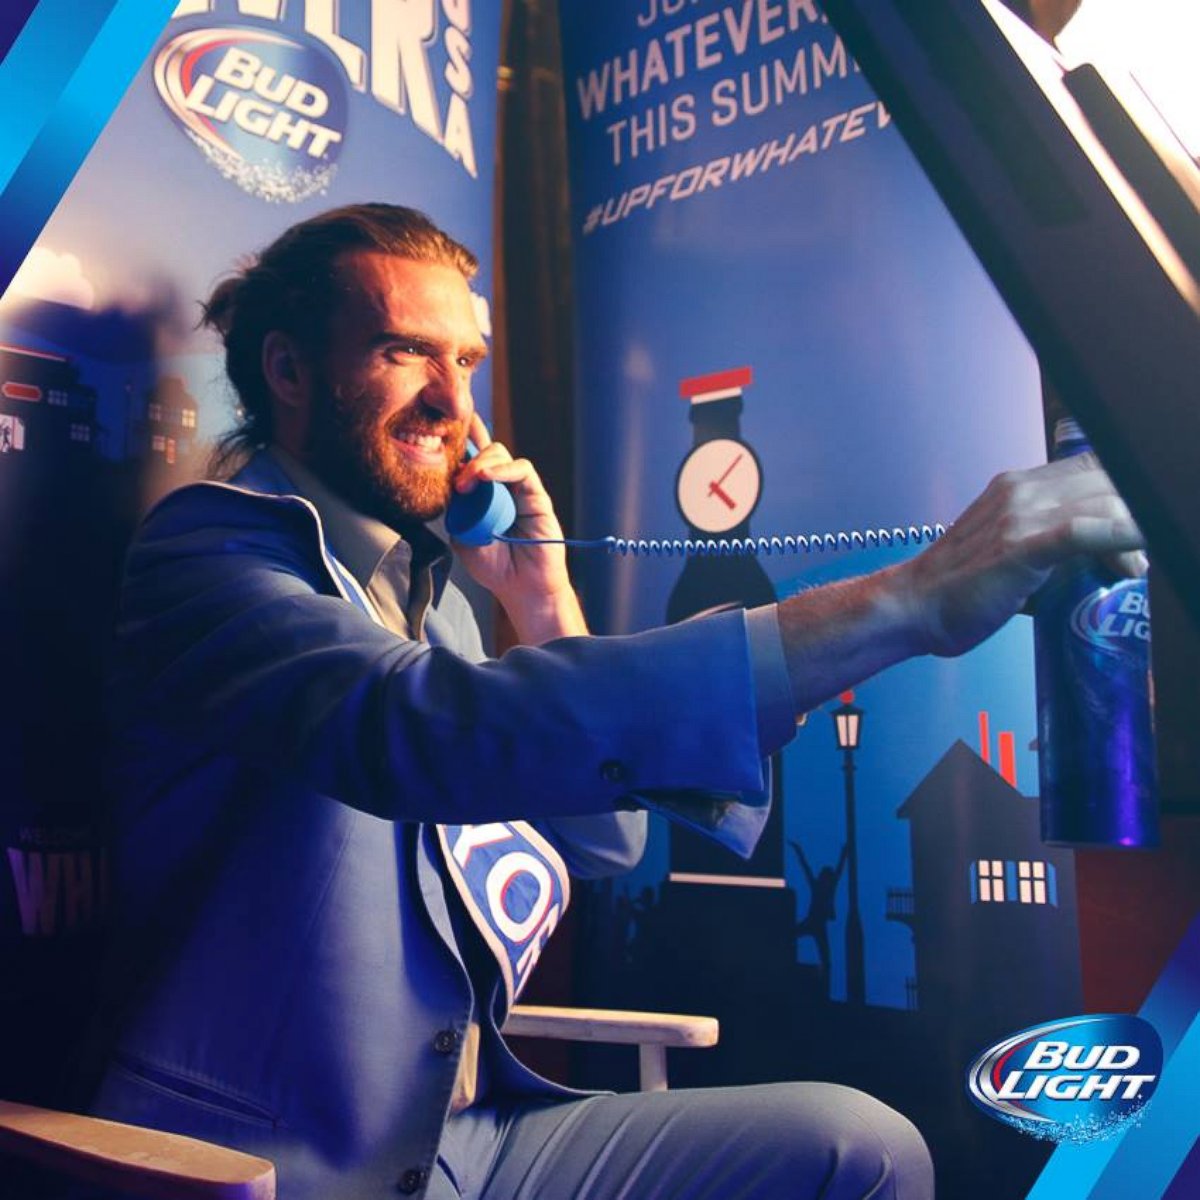 PHOTO: The "mayor" of Whatever, USA, is seen in this Bud Light promotional image. 